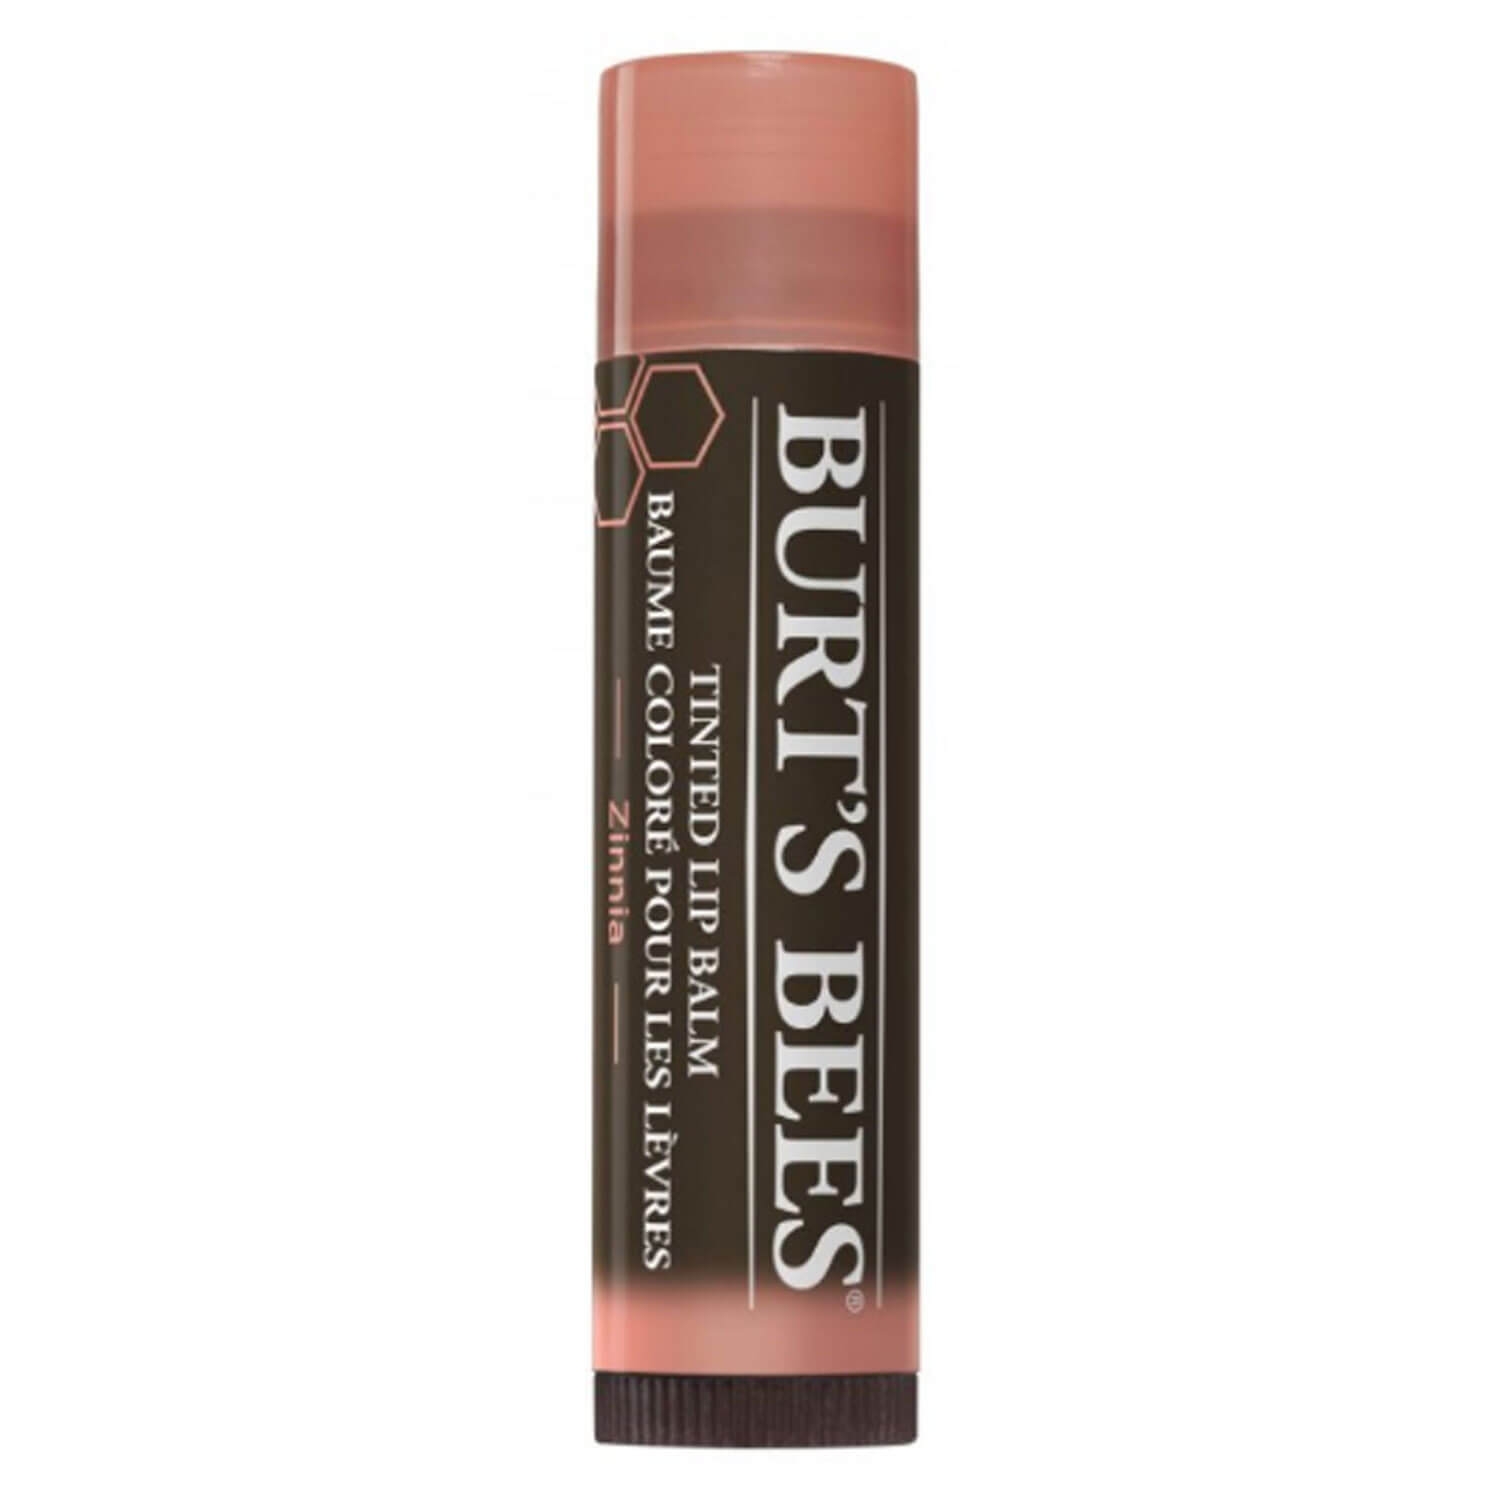 Product image from Burt's Bees - Tinted Lip Balm Zinnia